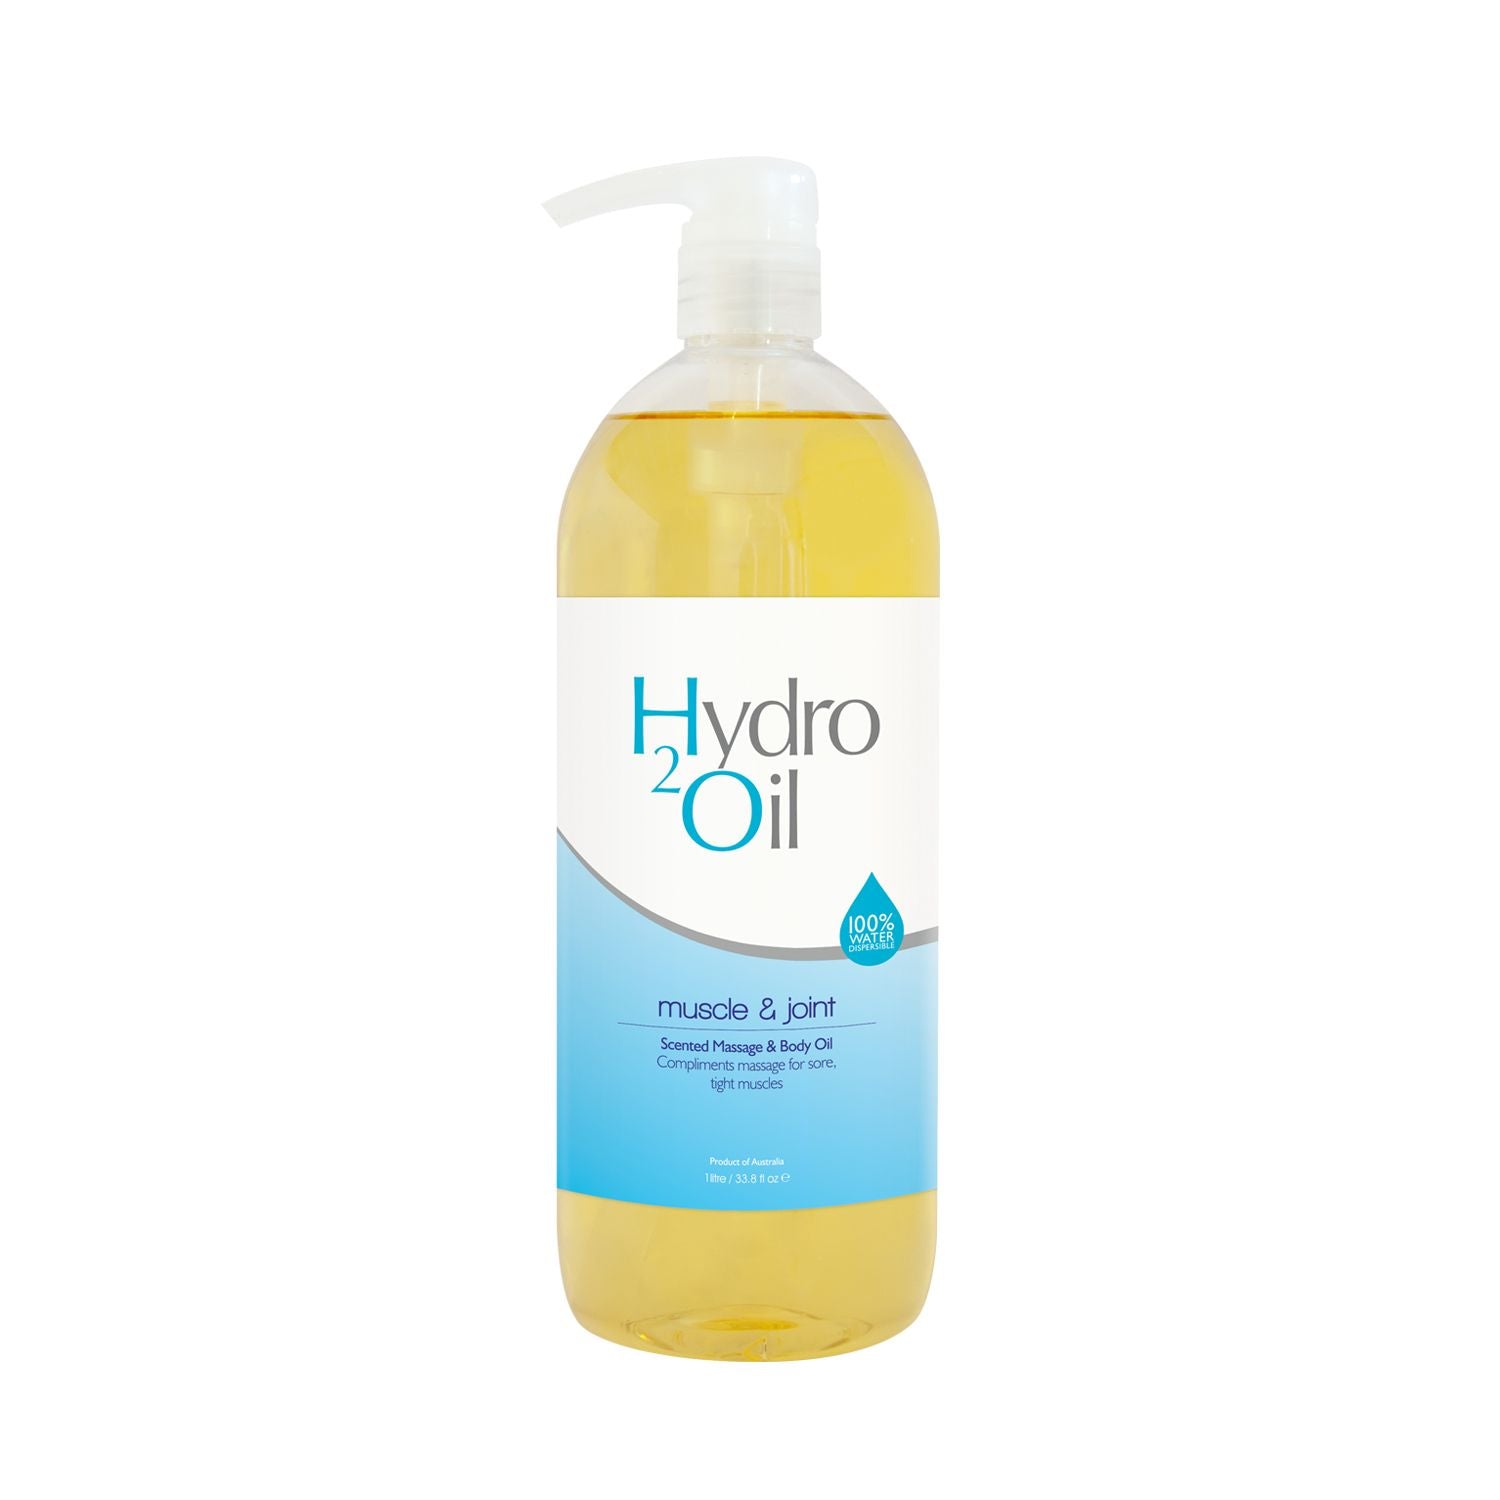 Hydro 2 Oil Muscle & Joint 1L